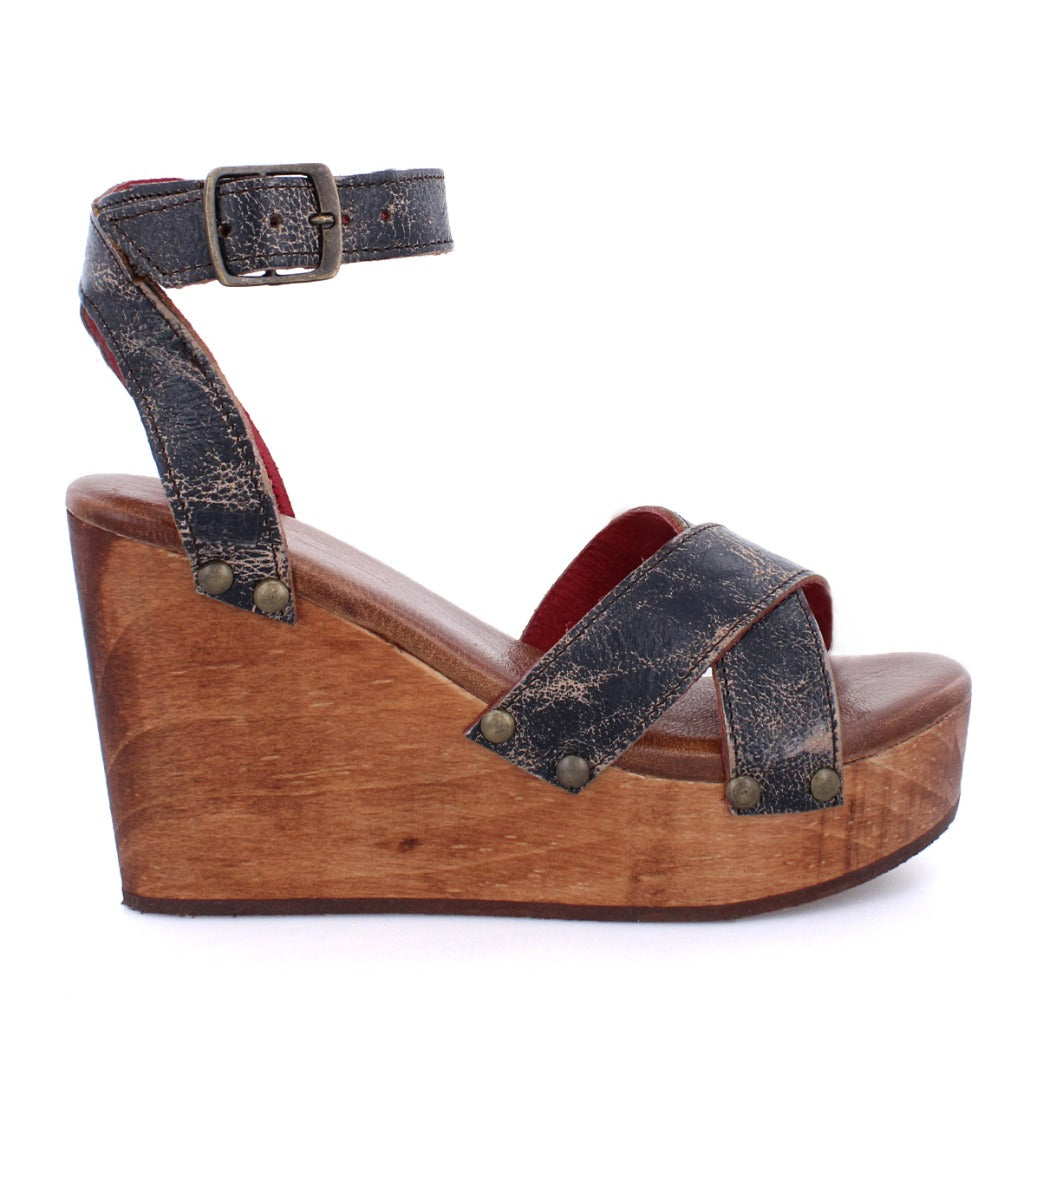 A women's Grettell wooden wedge sandal with straps and wooden heel by Bed Stu.